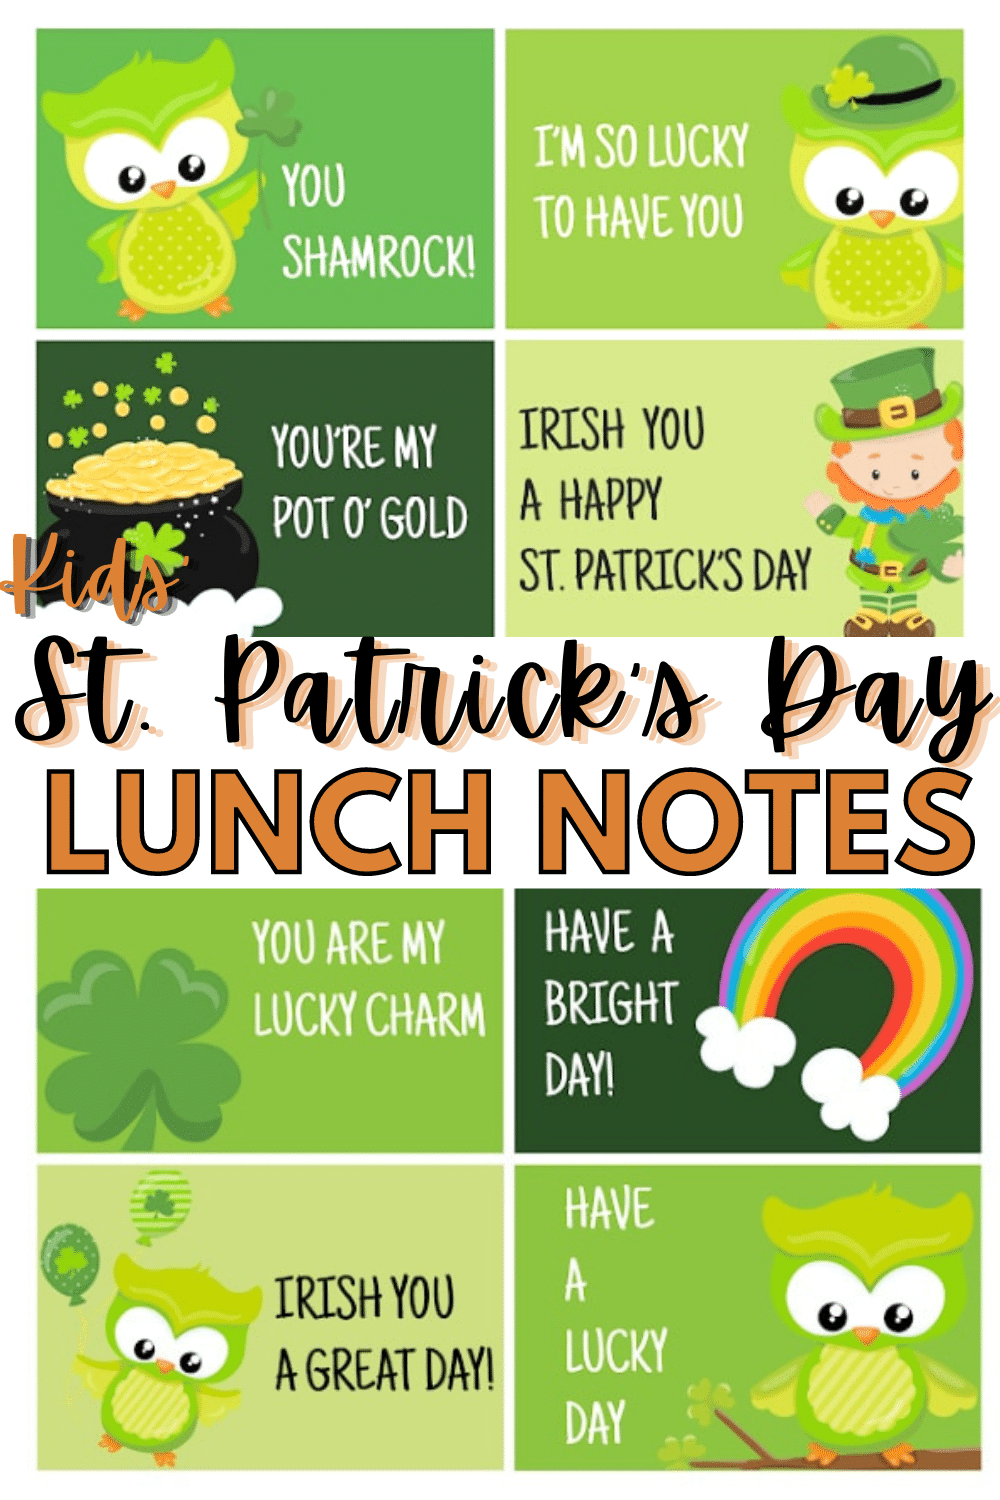 St. Patrick's Day Lunch Notes for Kids will brighten this Irish holiday at school. Print these off at home and send one each day to give your kids a smile. #stpatricksday #printables #lunchnotes via @wondermomwannab